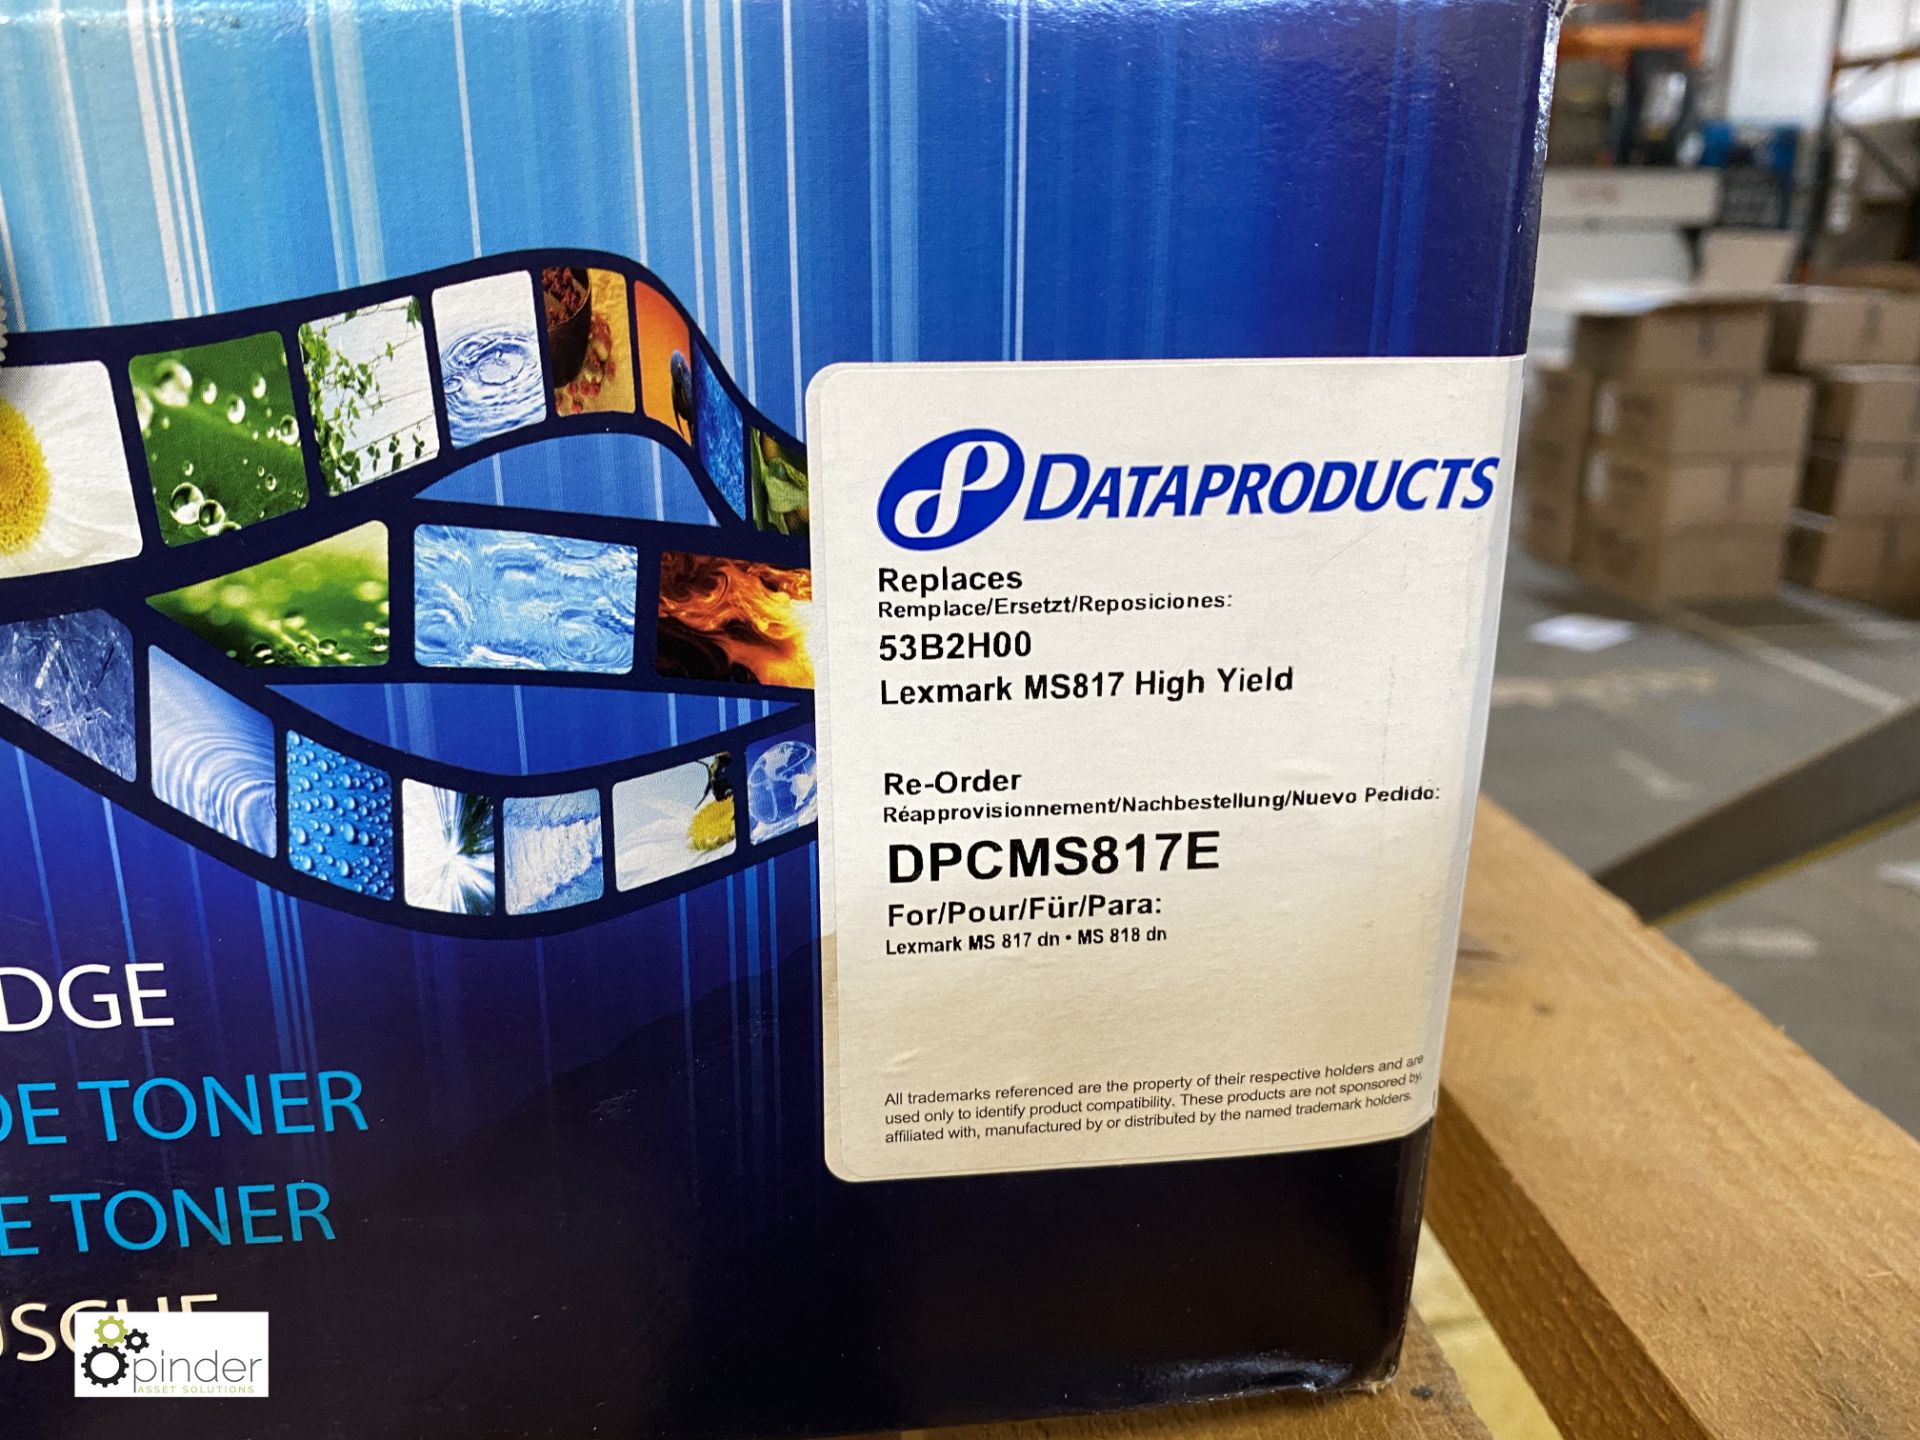 Data Products Toner Cartridge, high yield for Lexmark 53B2H00, boxed and unused - Image 2 of 2